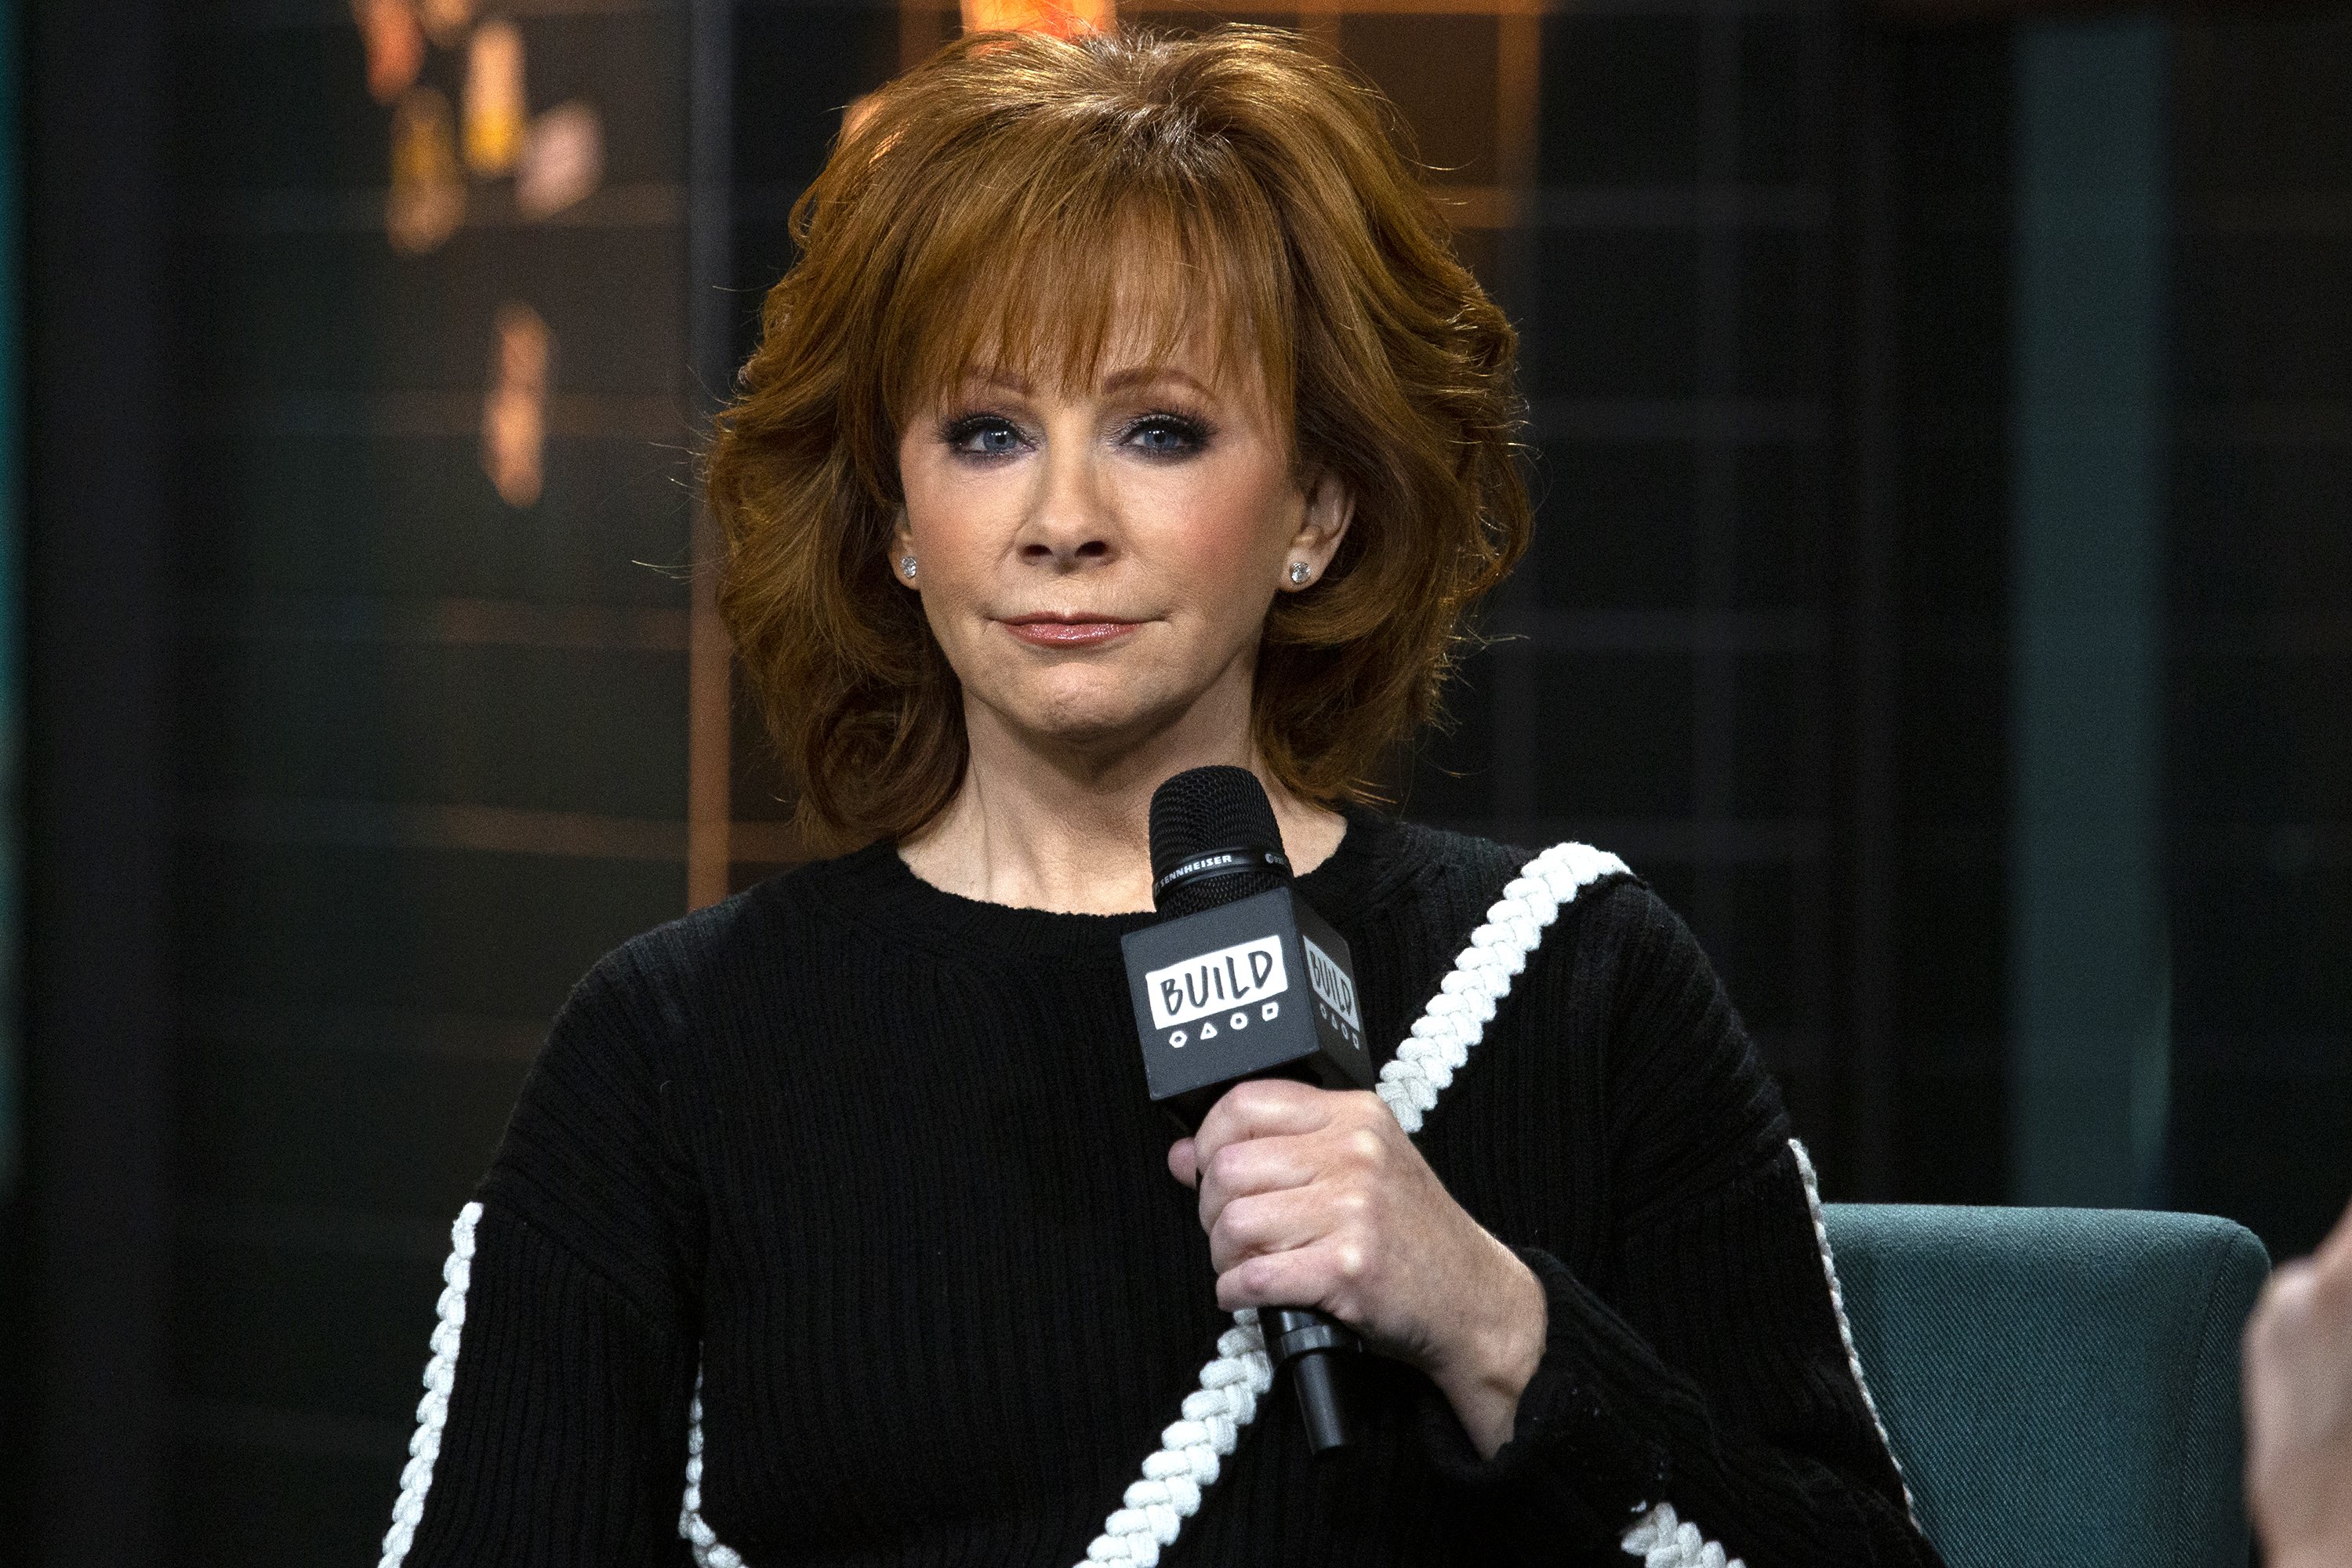 Reba McEntire, country singer | Photo: Getty Images